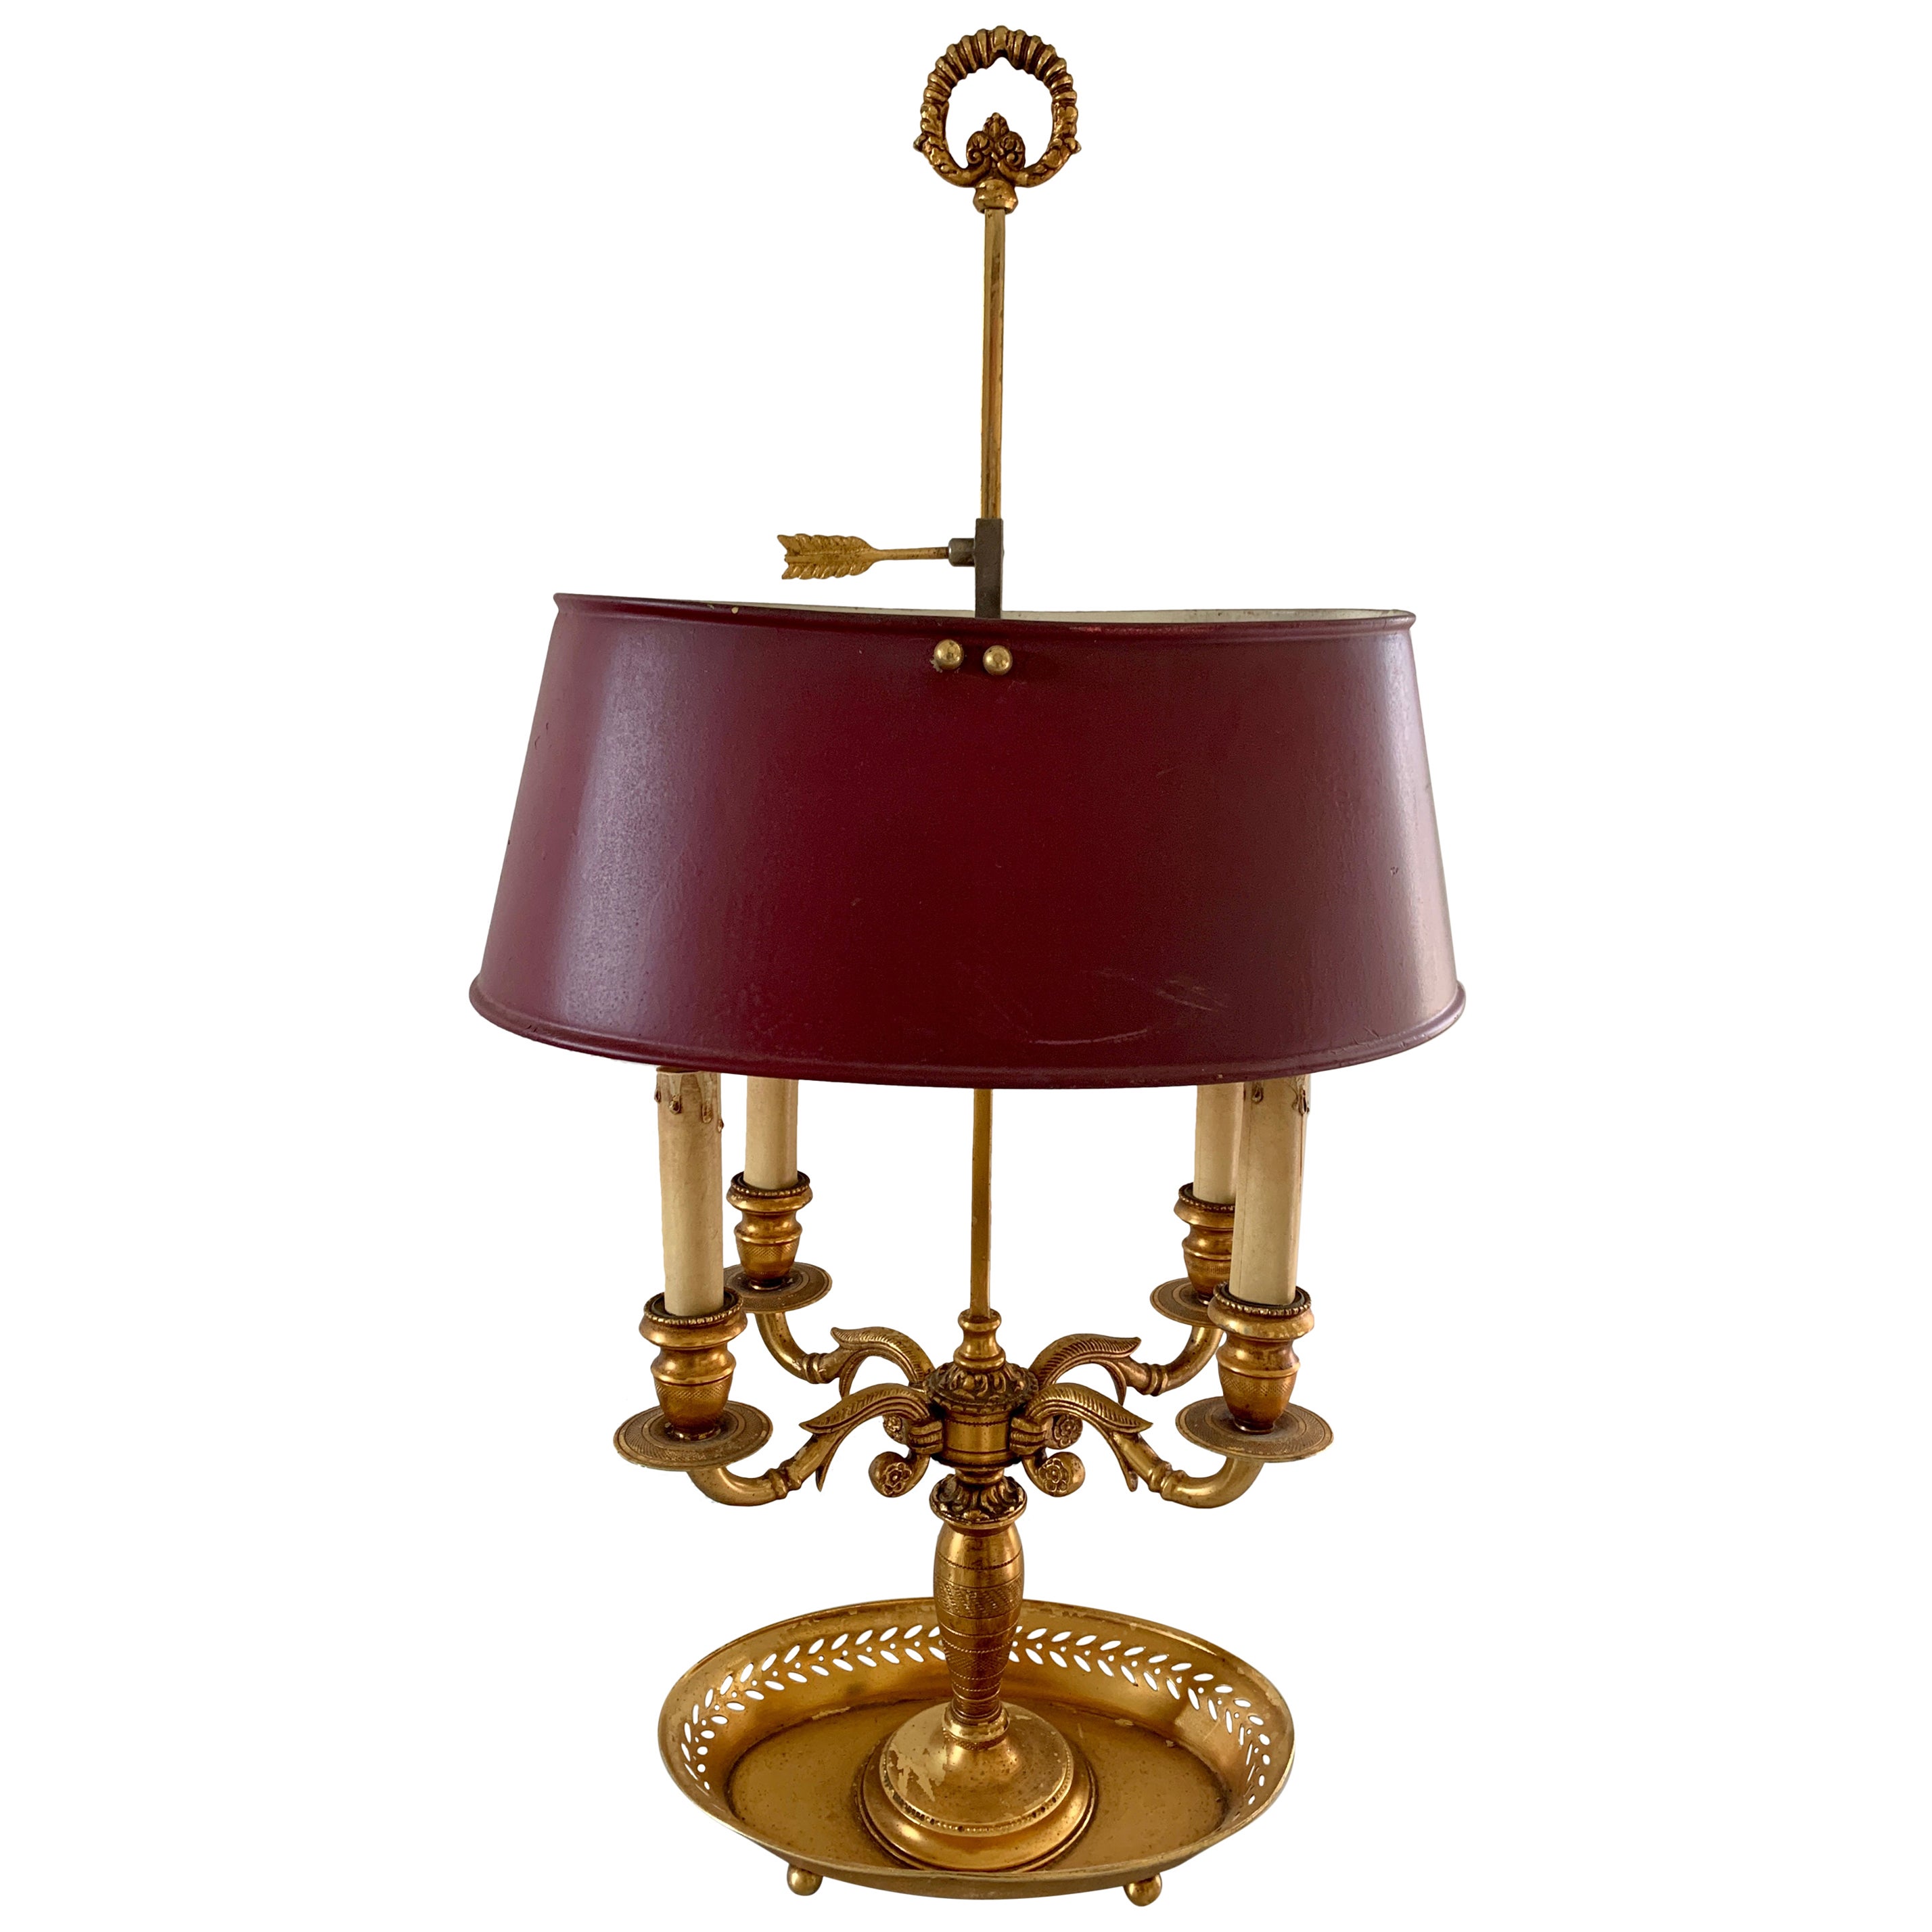 Early 20th Century Brass Four Arm Bouillotte Lamp with Burgundy Tole Shade For Sale